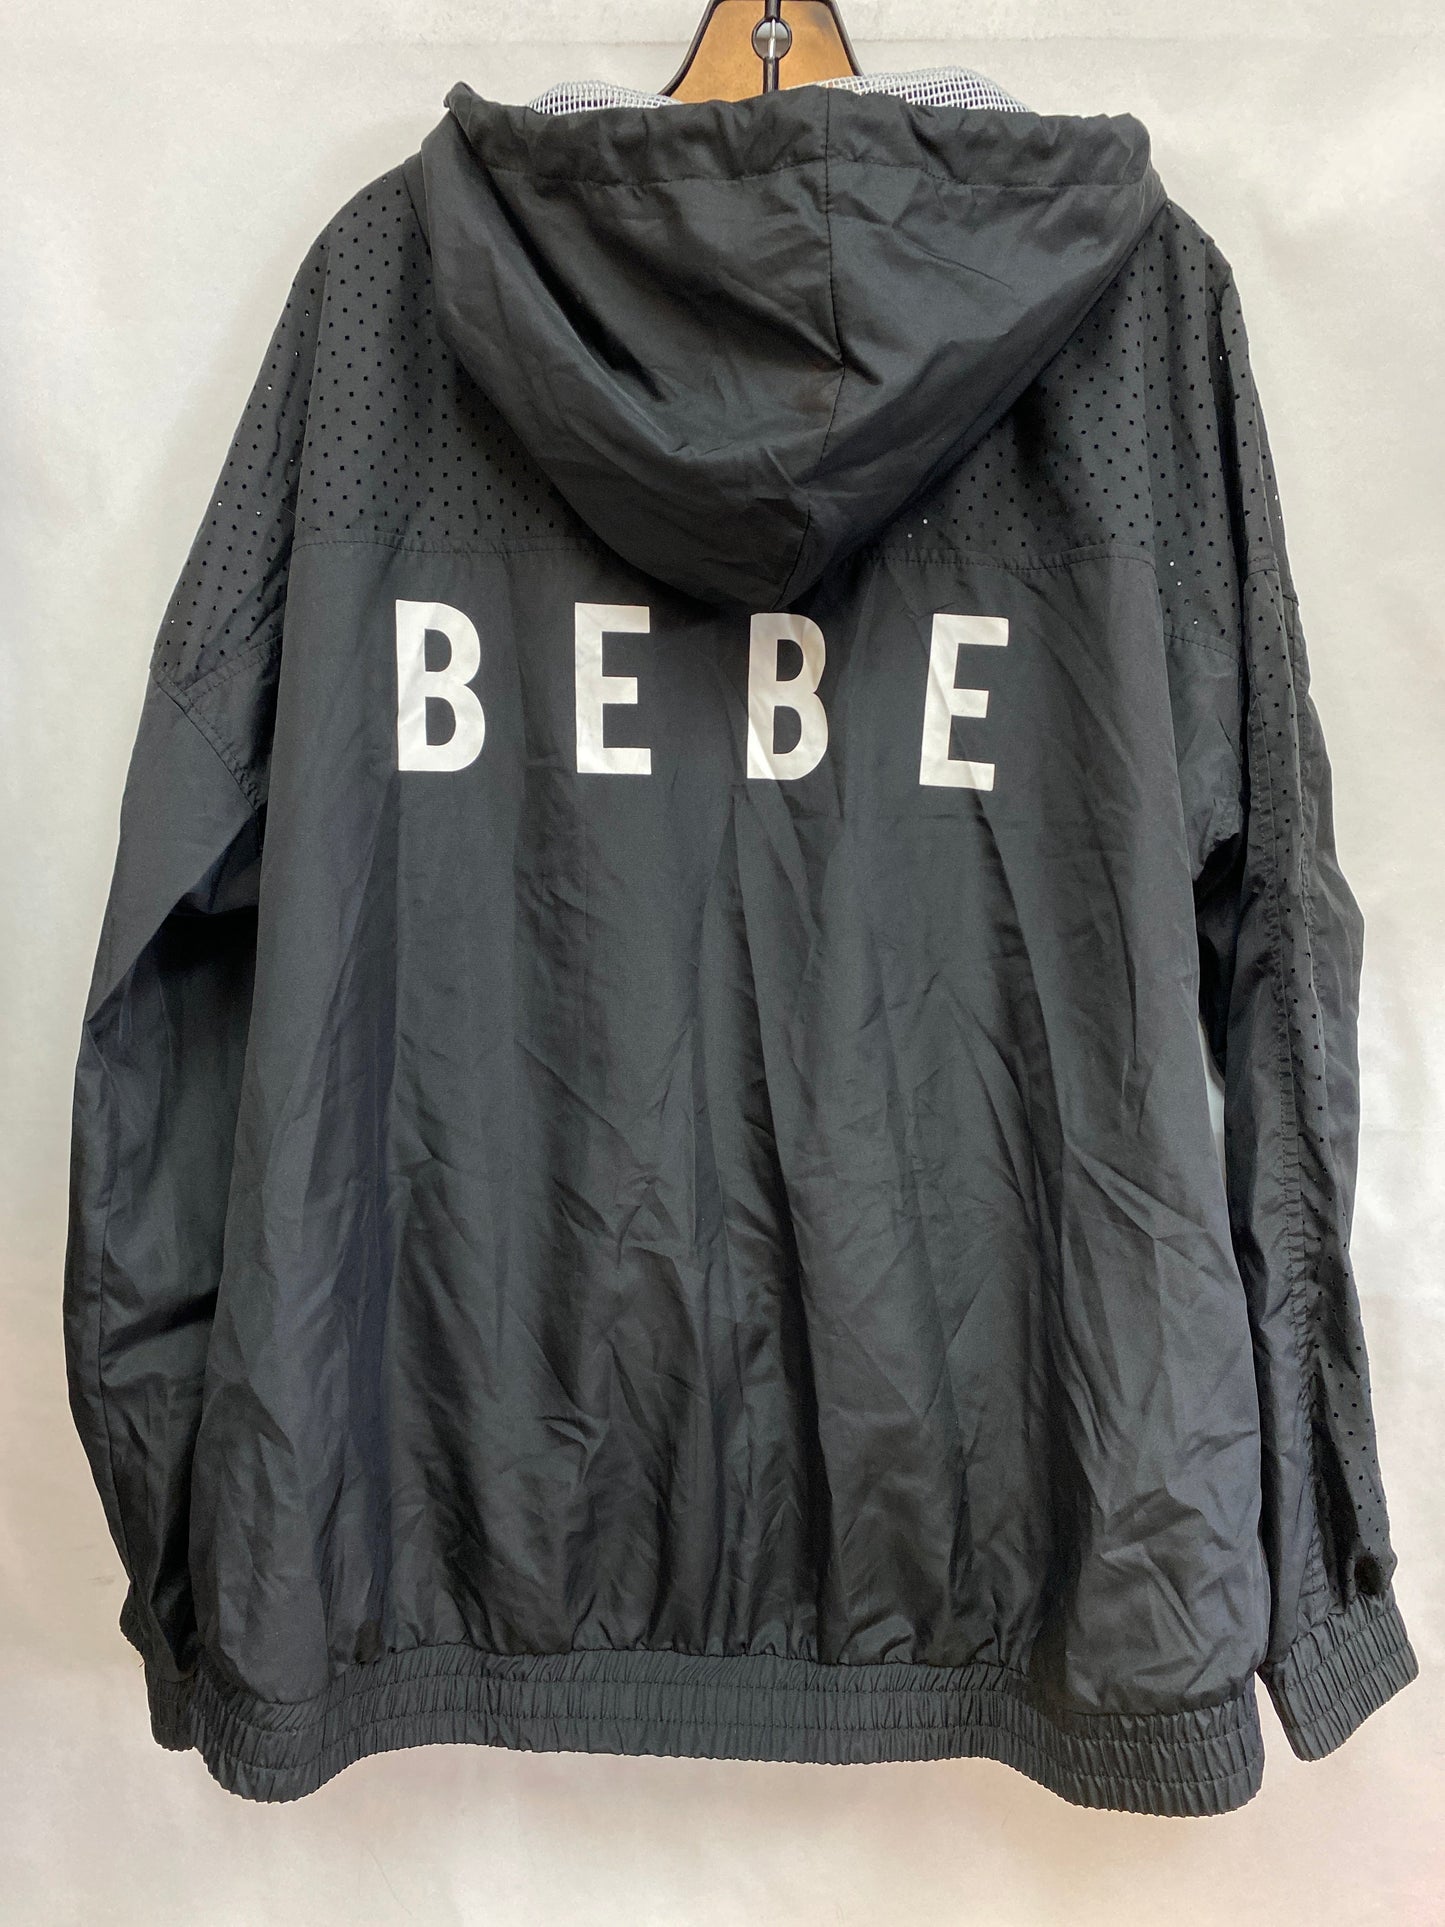 Athletic Jacket By Bebe  Size: 1x